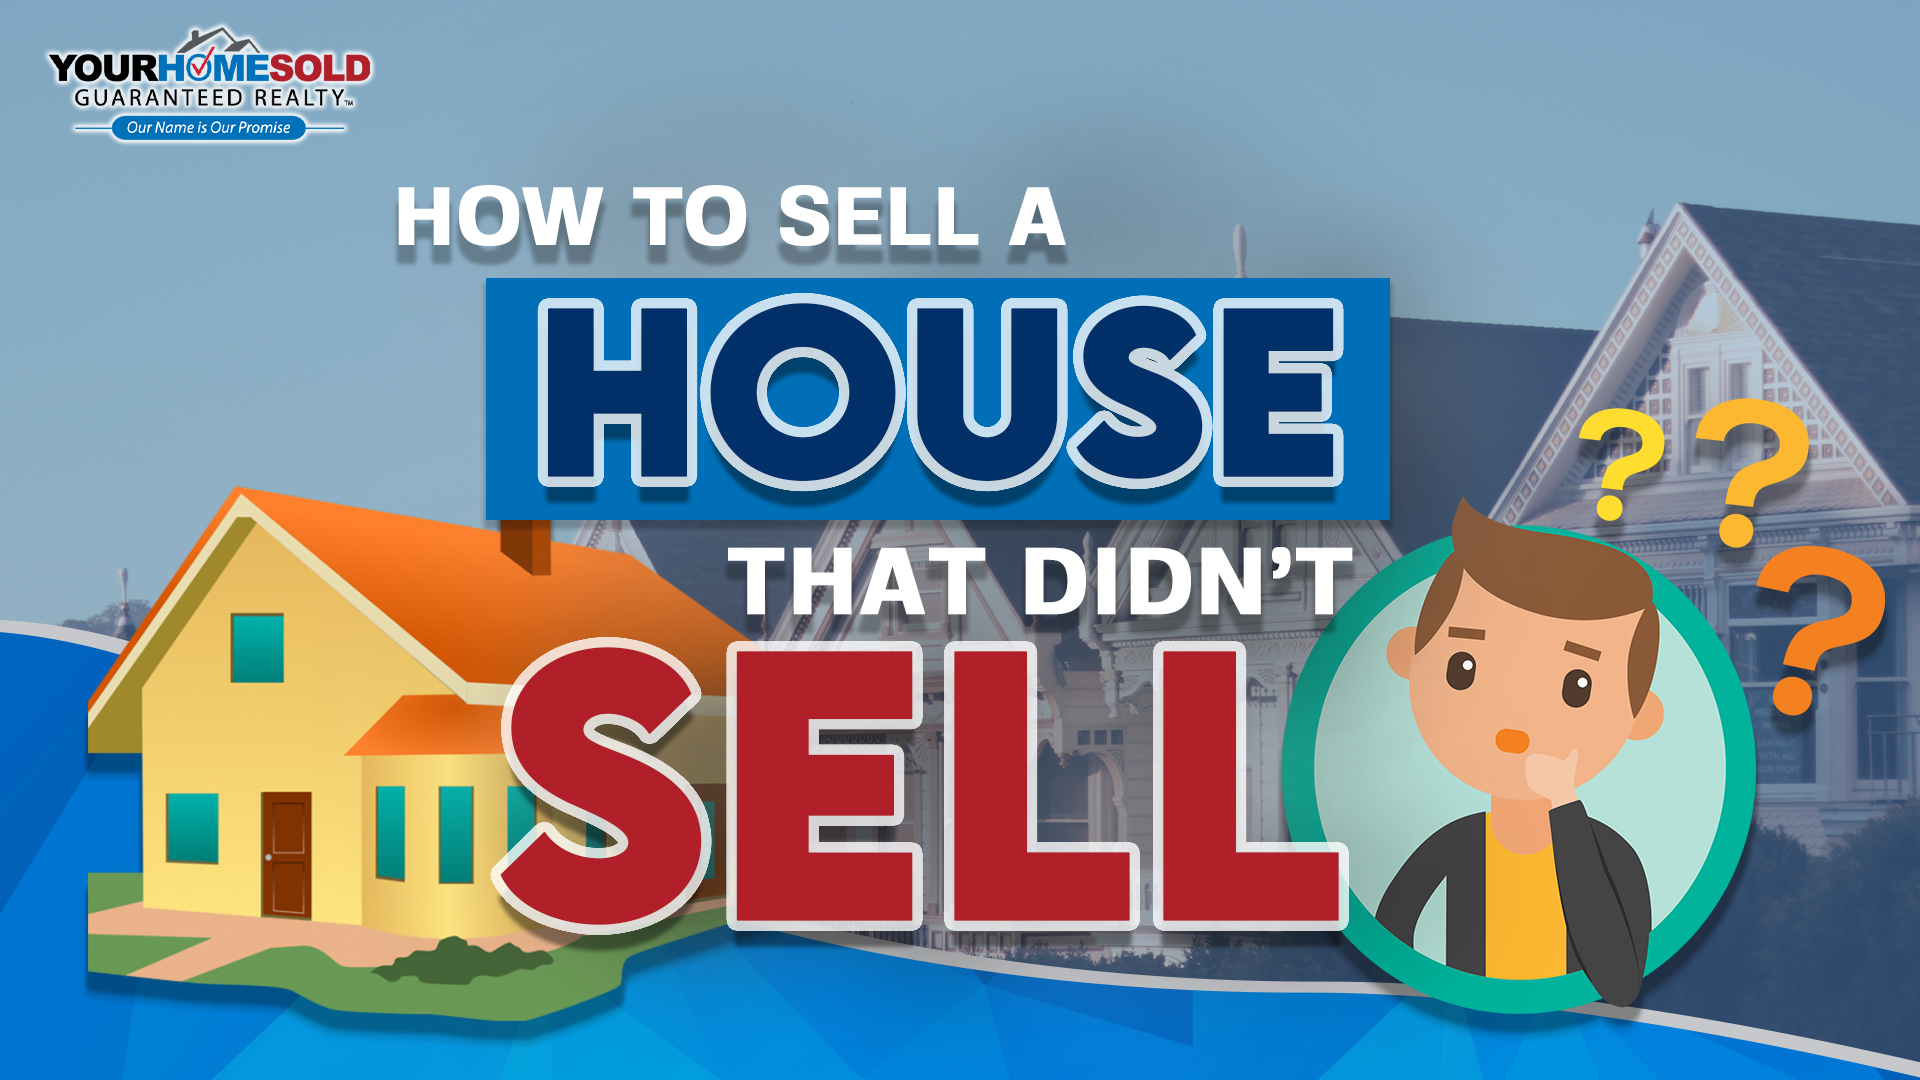 how to sell a house didnt sell.jpg